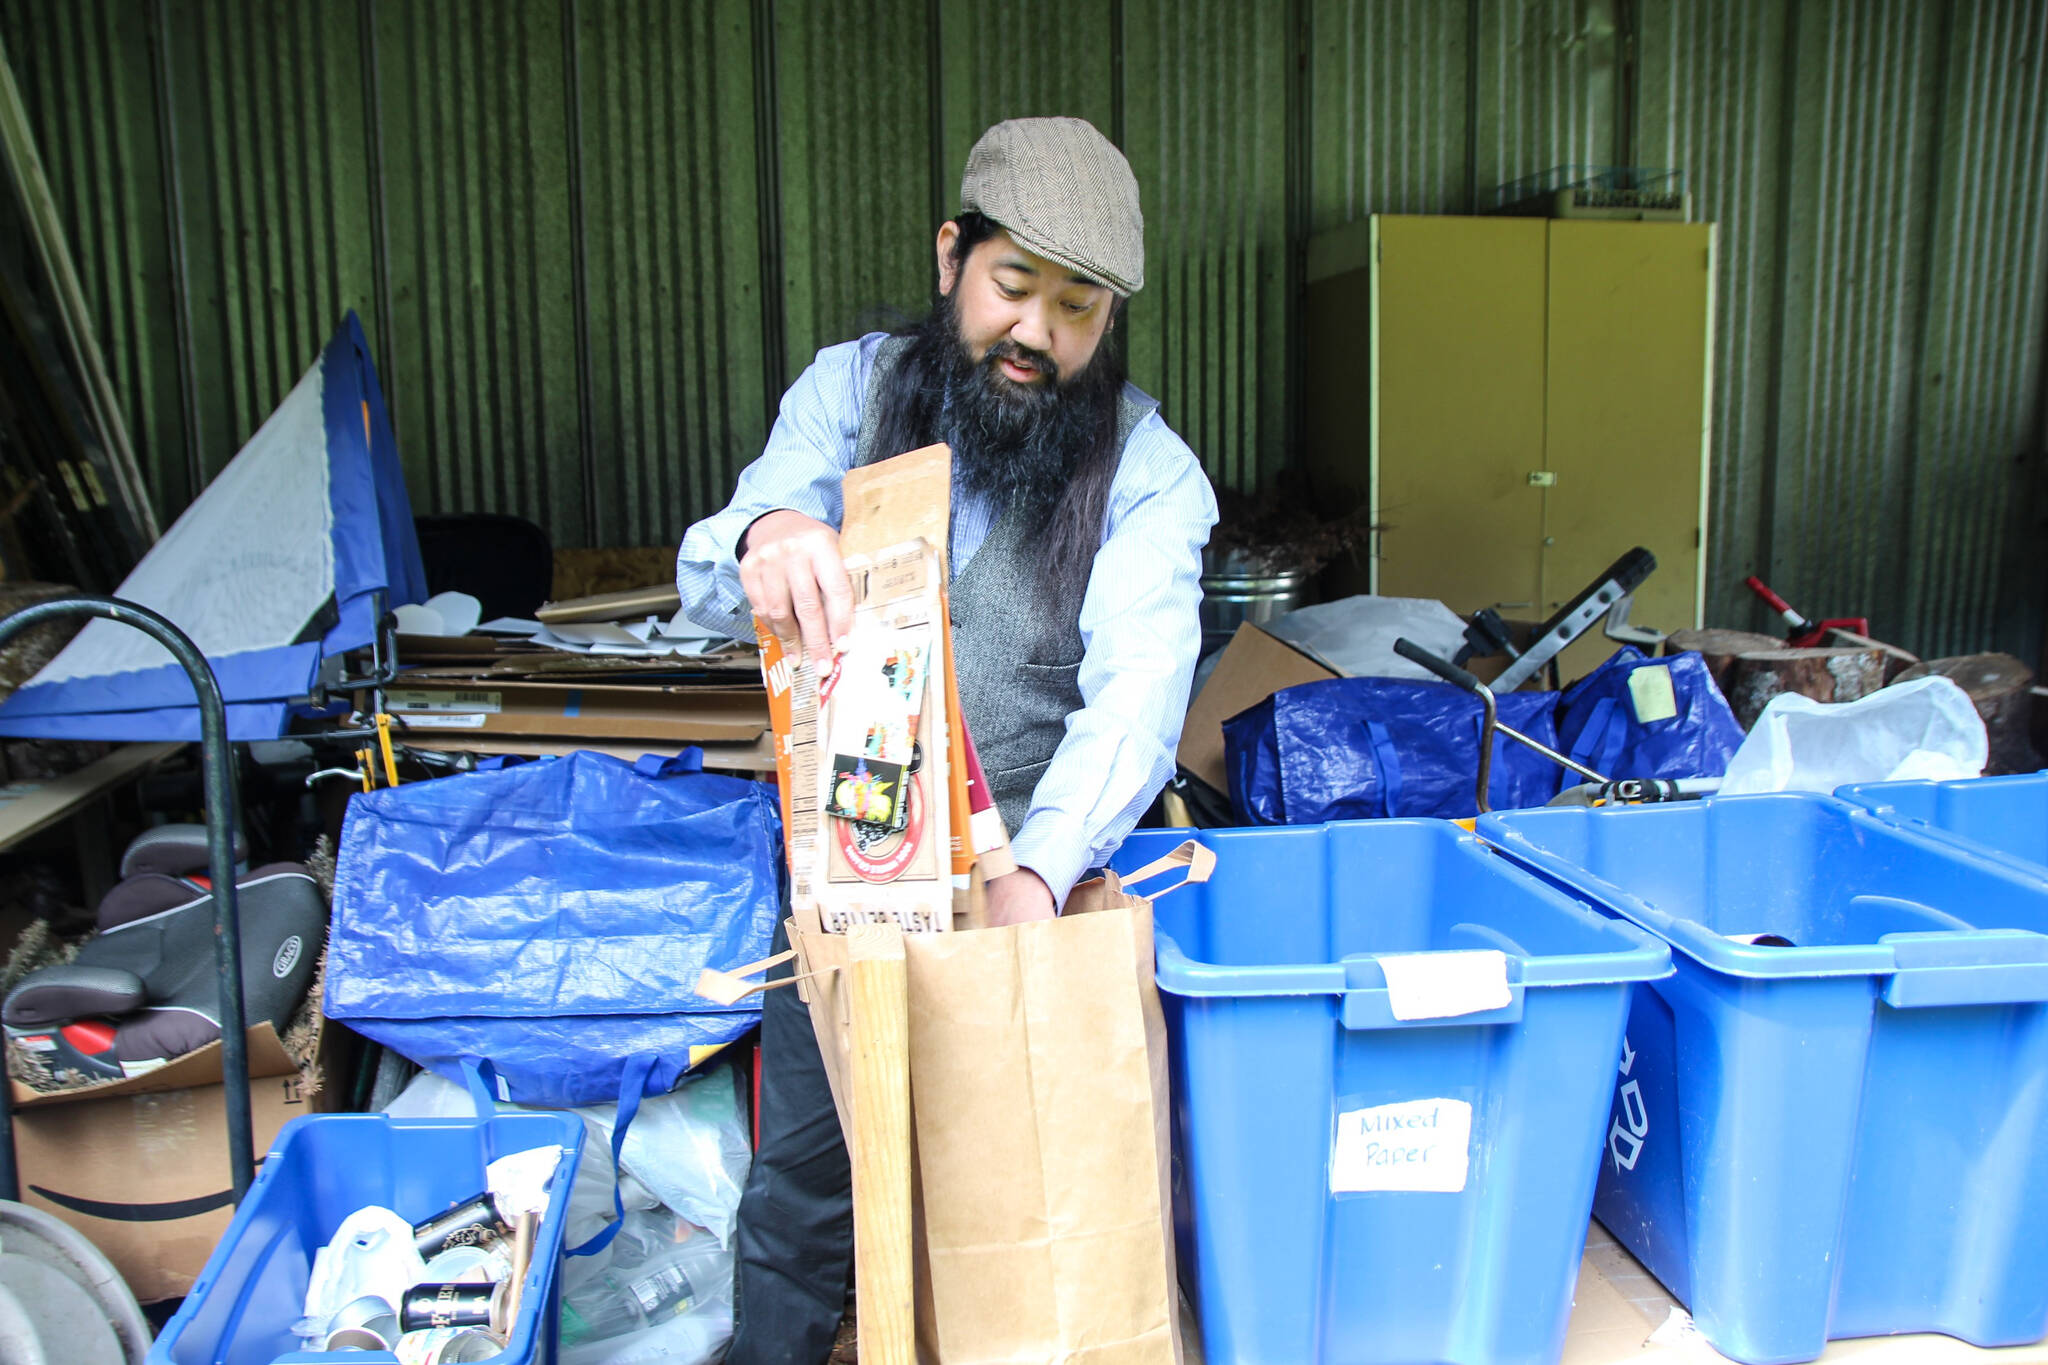 Derek Hoshiko separates his household’s recyclables. (Photo by Luisa Loi)